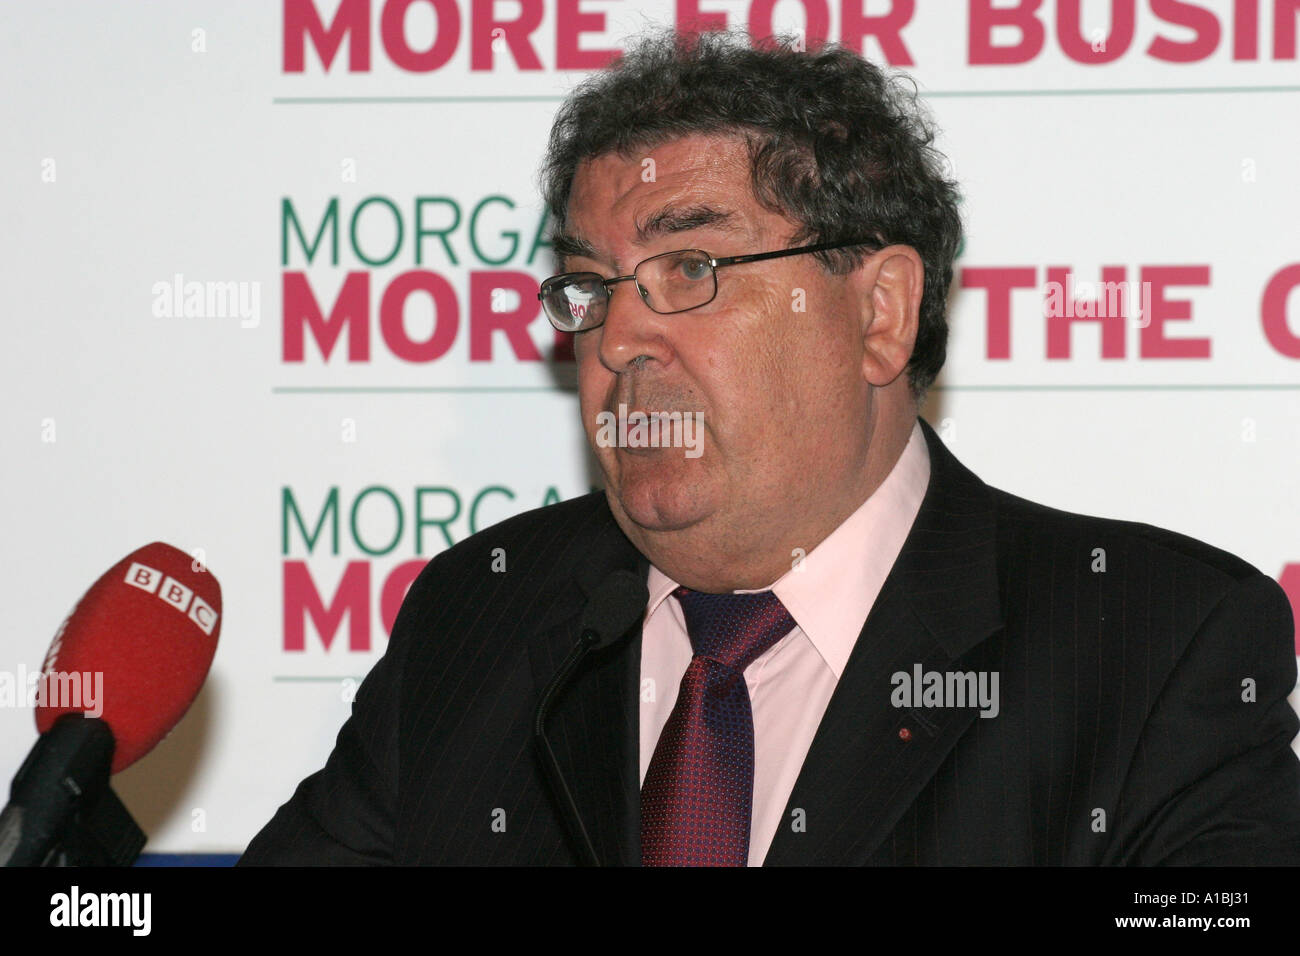 SDLP former leader and nobel peace prize winner John Hume MP MEP MLA at a press conference in Belfast Northern Ireland Stock Photo